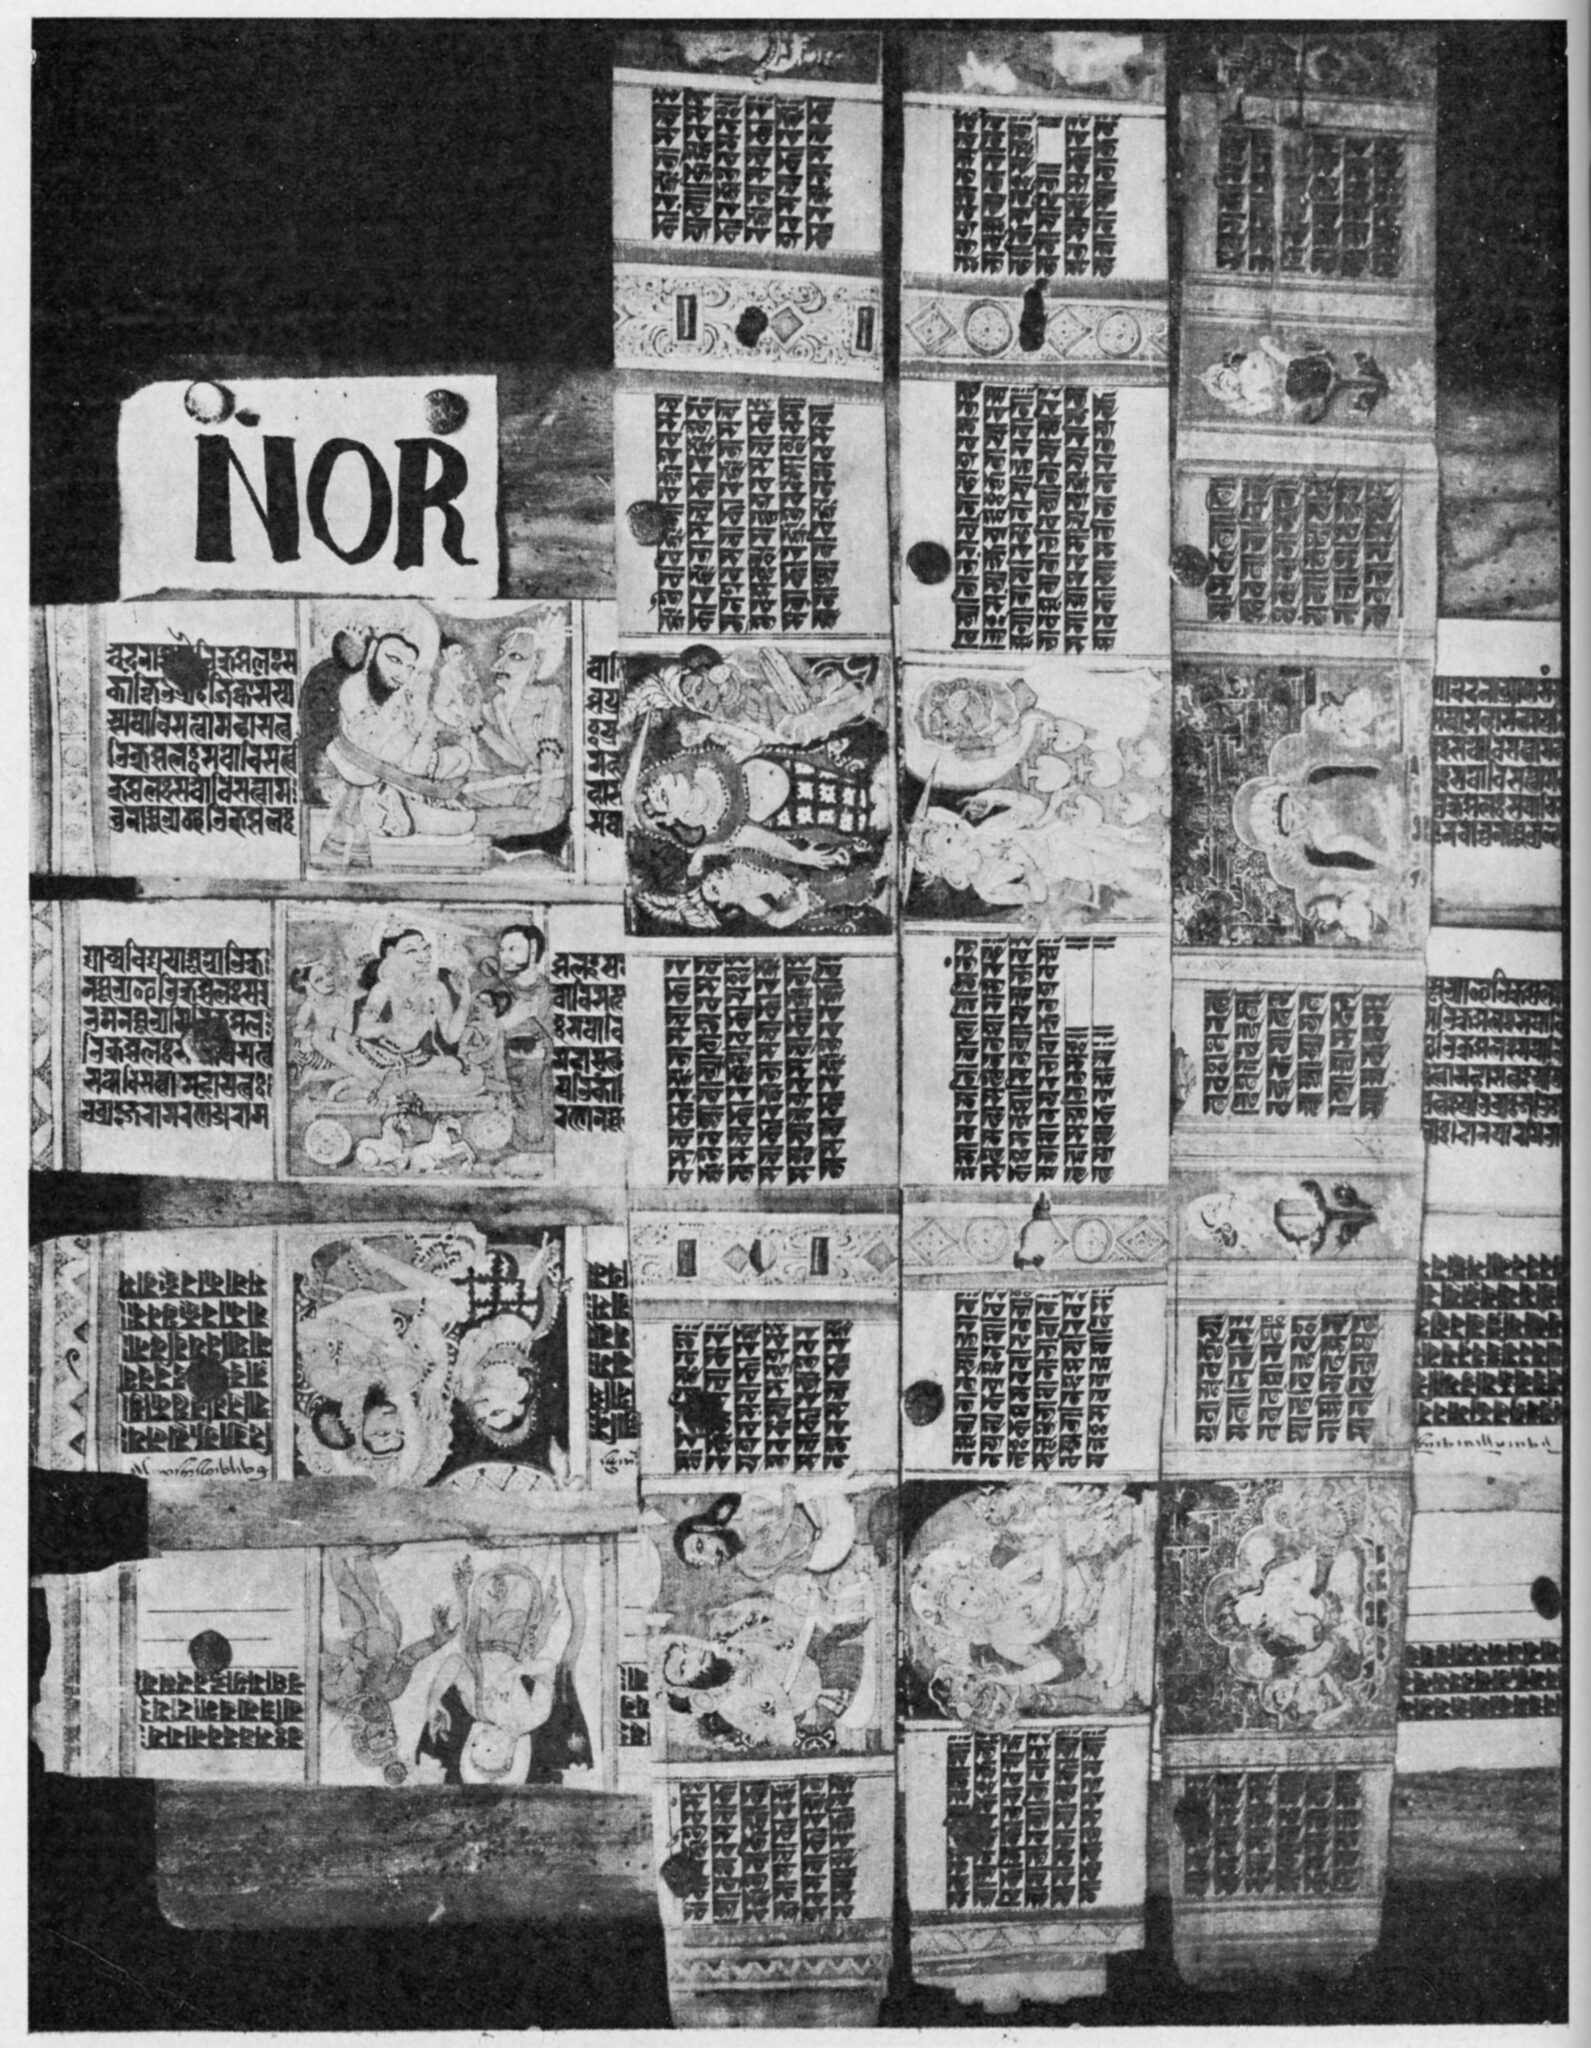 Black and white photograph of rectangular manuscript pages arranged in crosshatch pattern on wooden surface; “NOR” handprinted in upper left corner